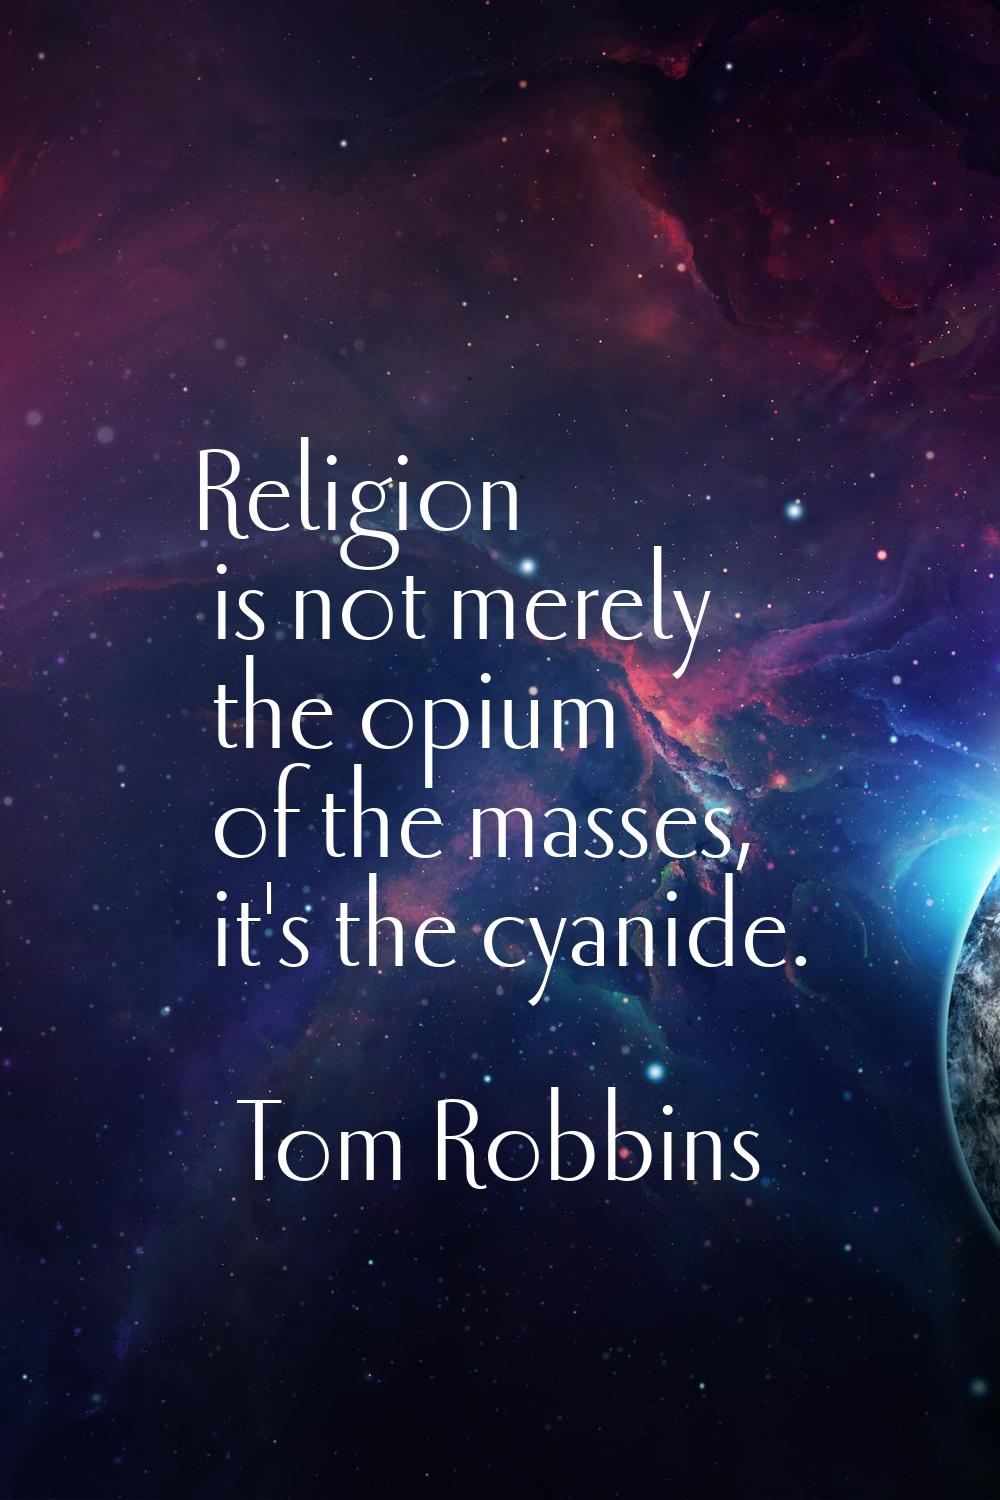 Religion is not merely the opium of the masses, it's the cyanide.